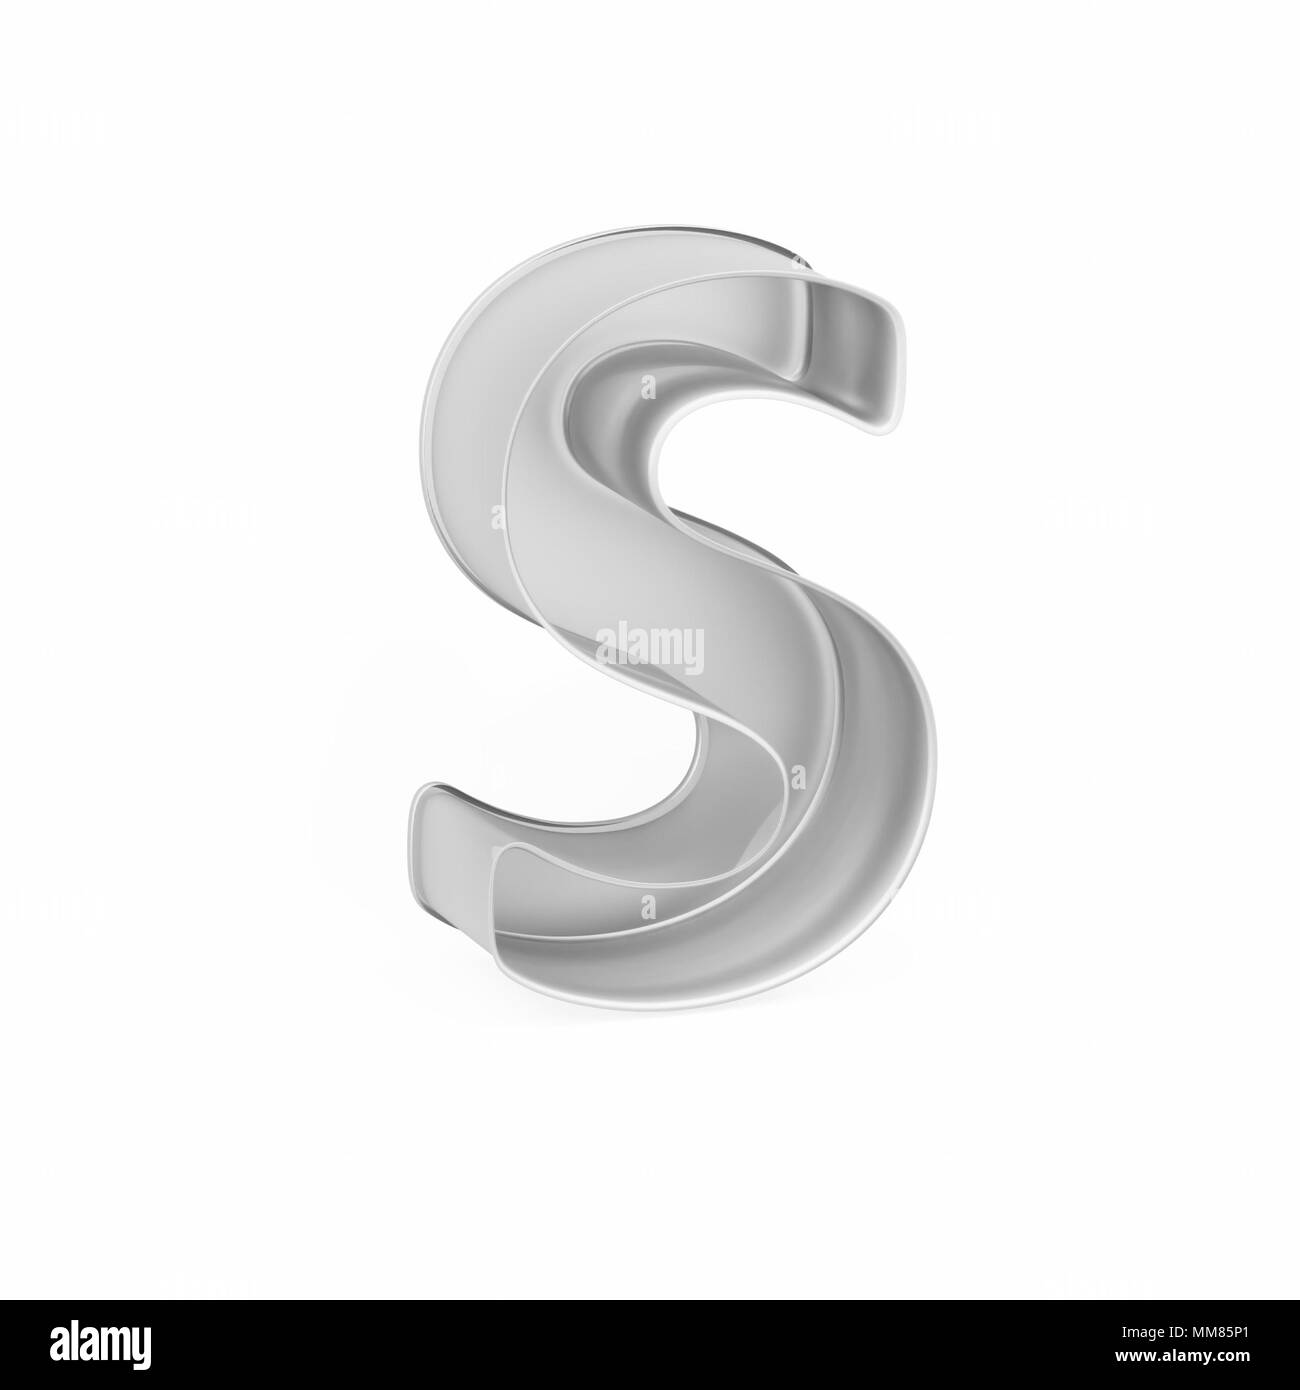 Metal baking cake pan or cookie cutter like capital letter S on white background, 3D rendered font image Stock Photo